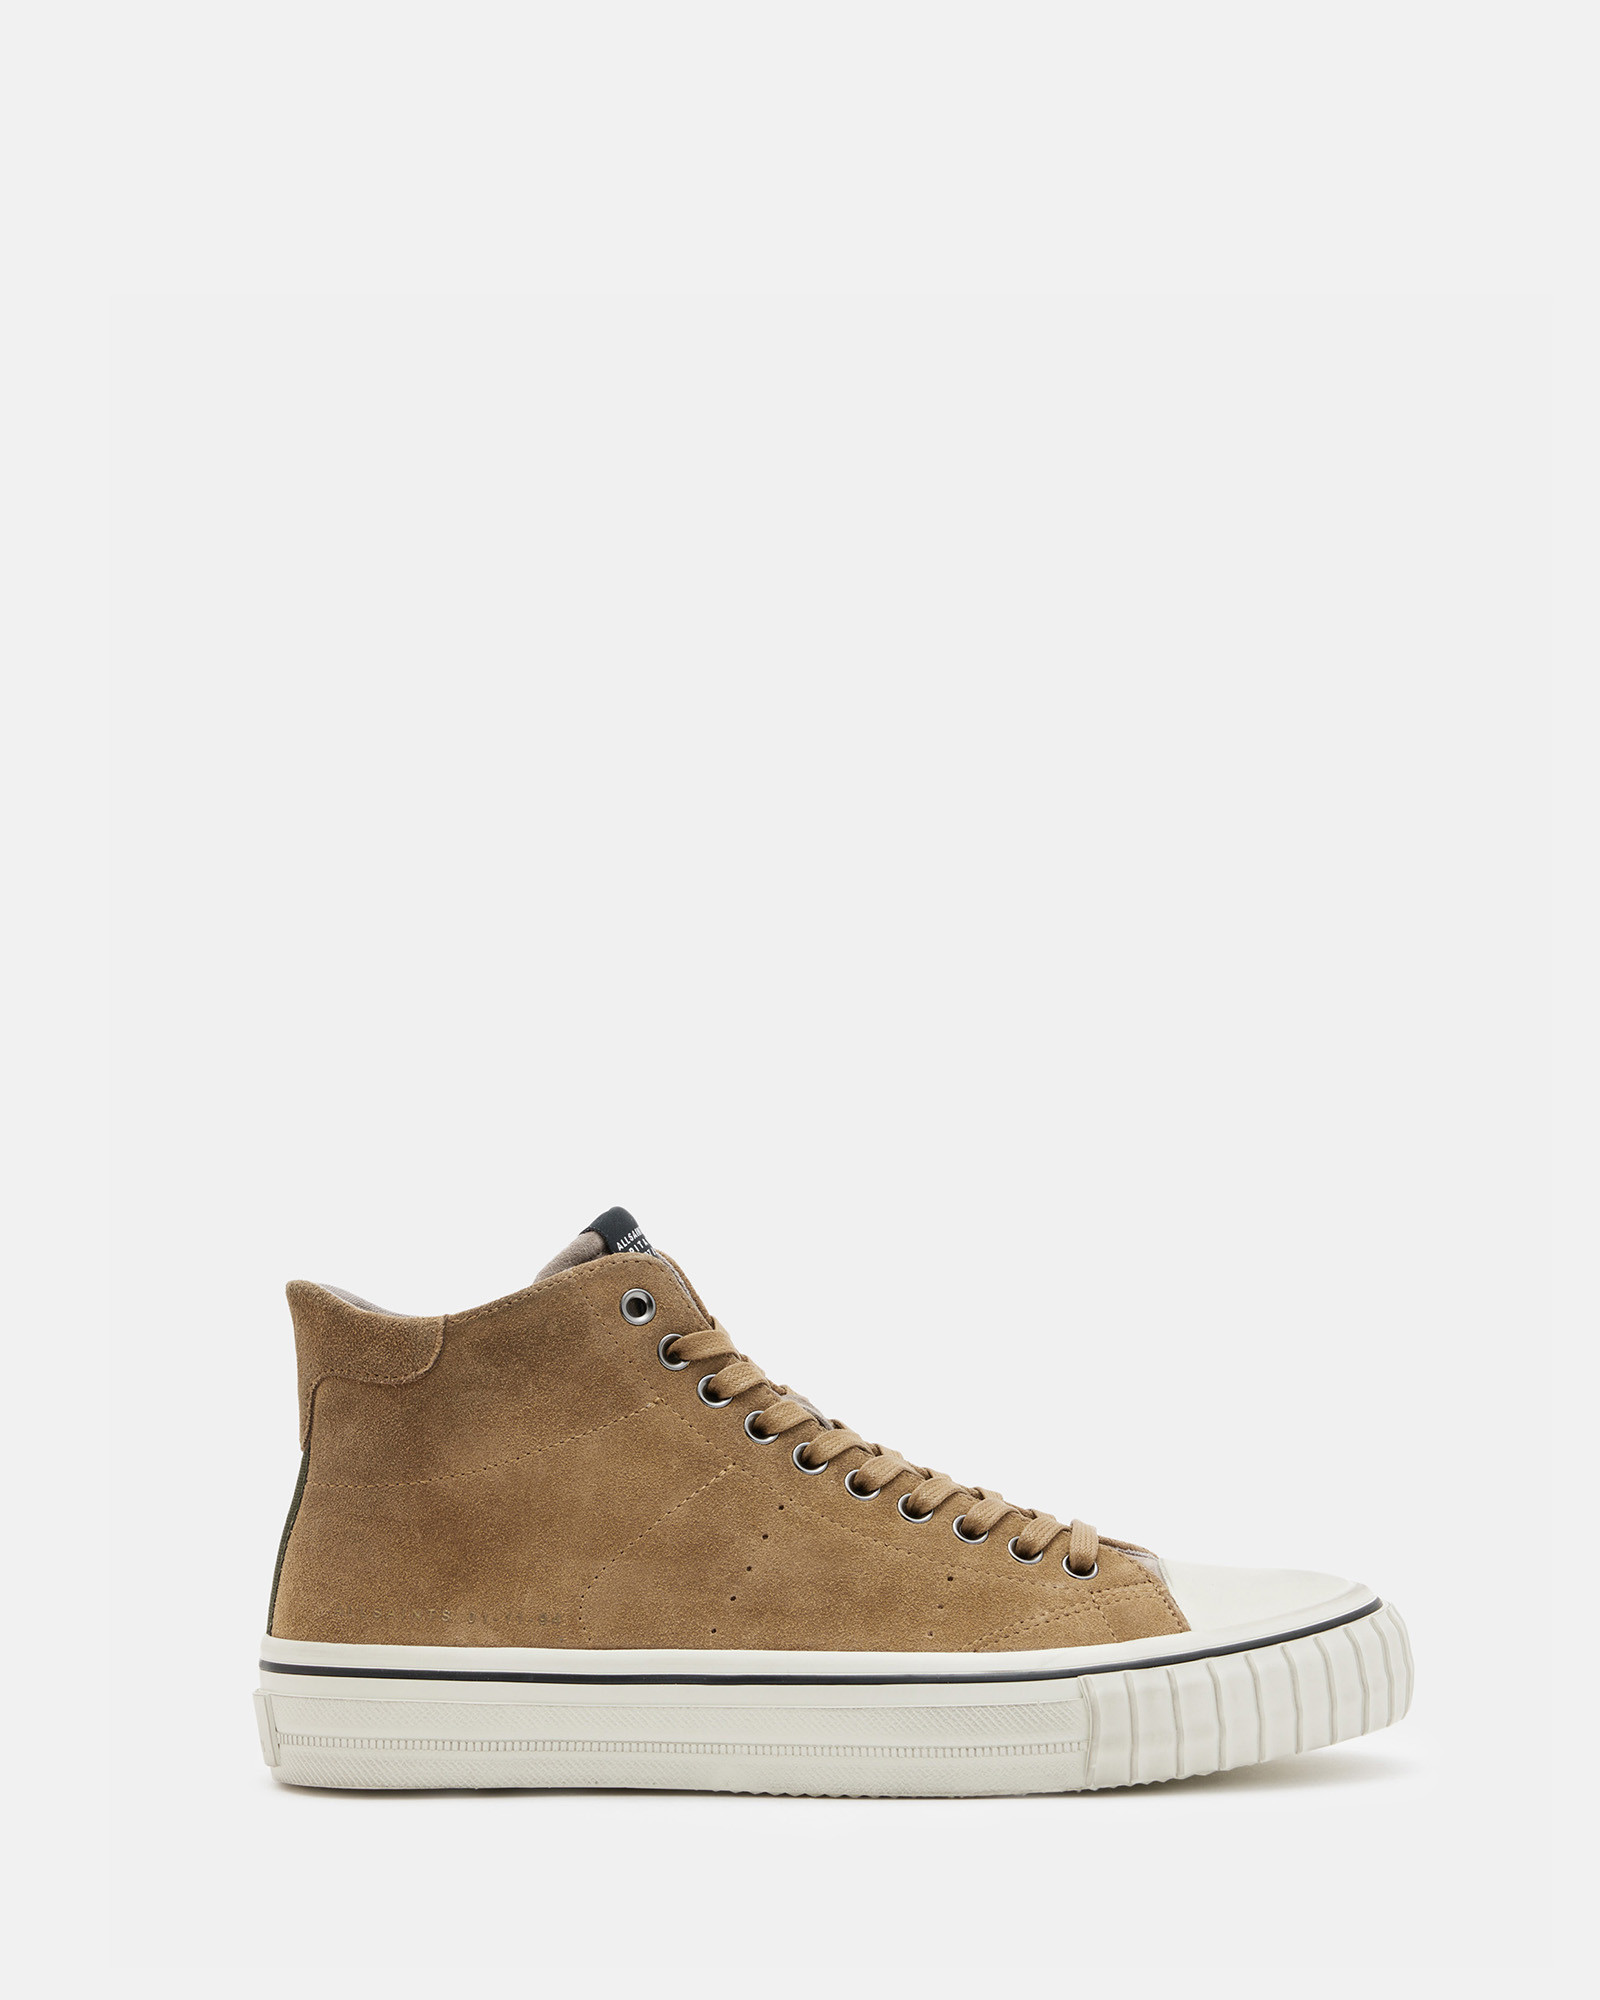 AllSaints Lewis Lace Up Suede High Top Trainers,, Tan